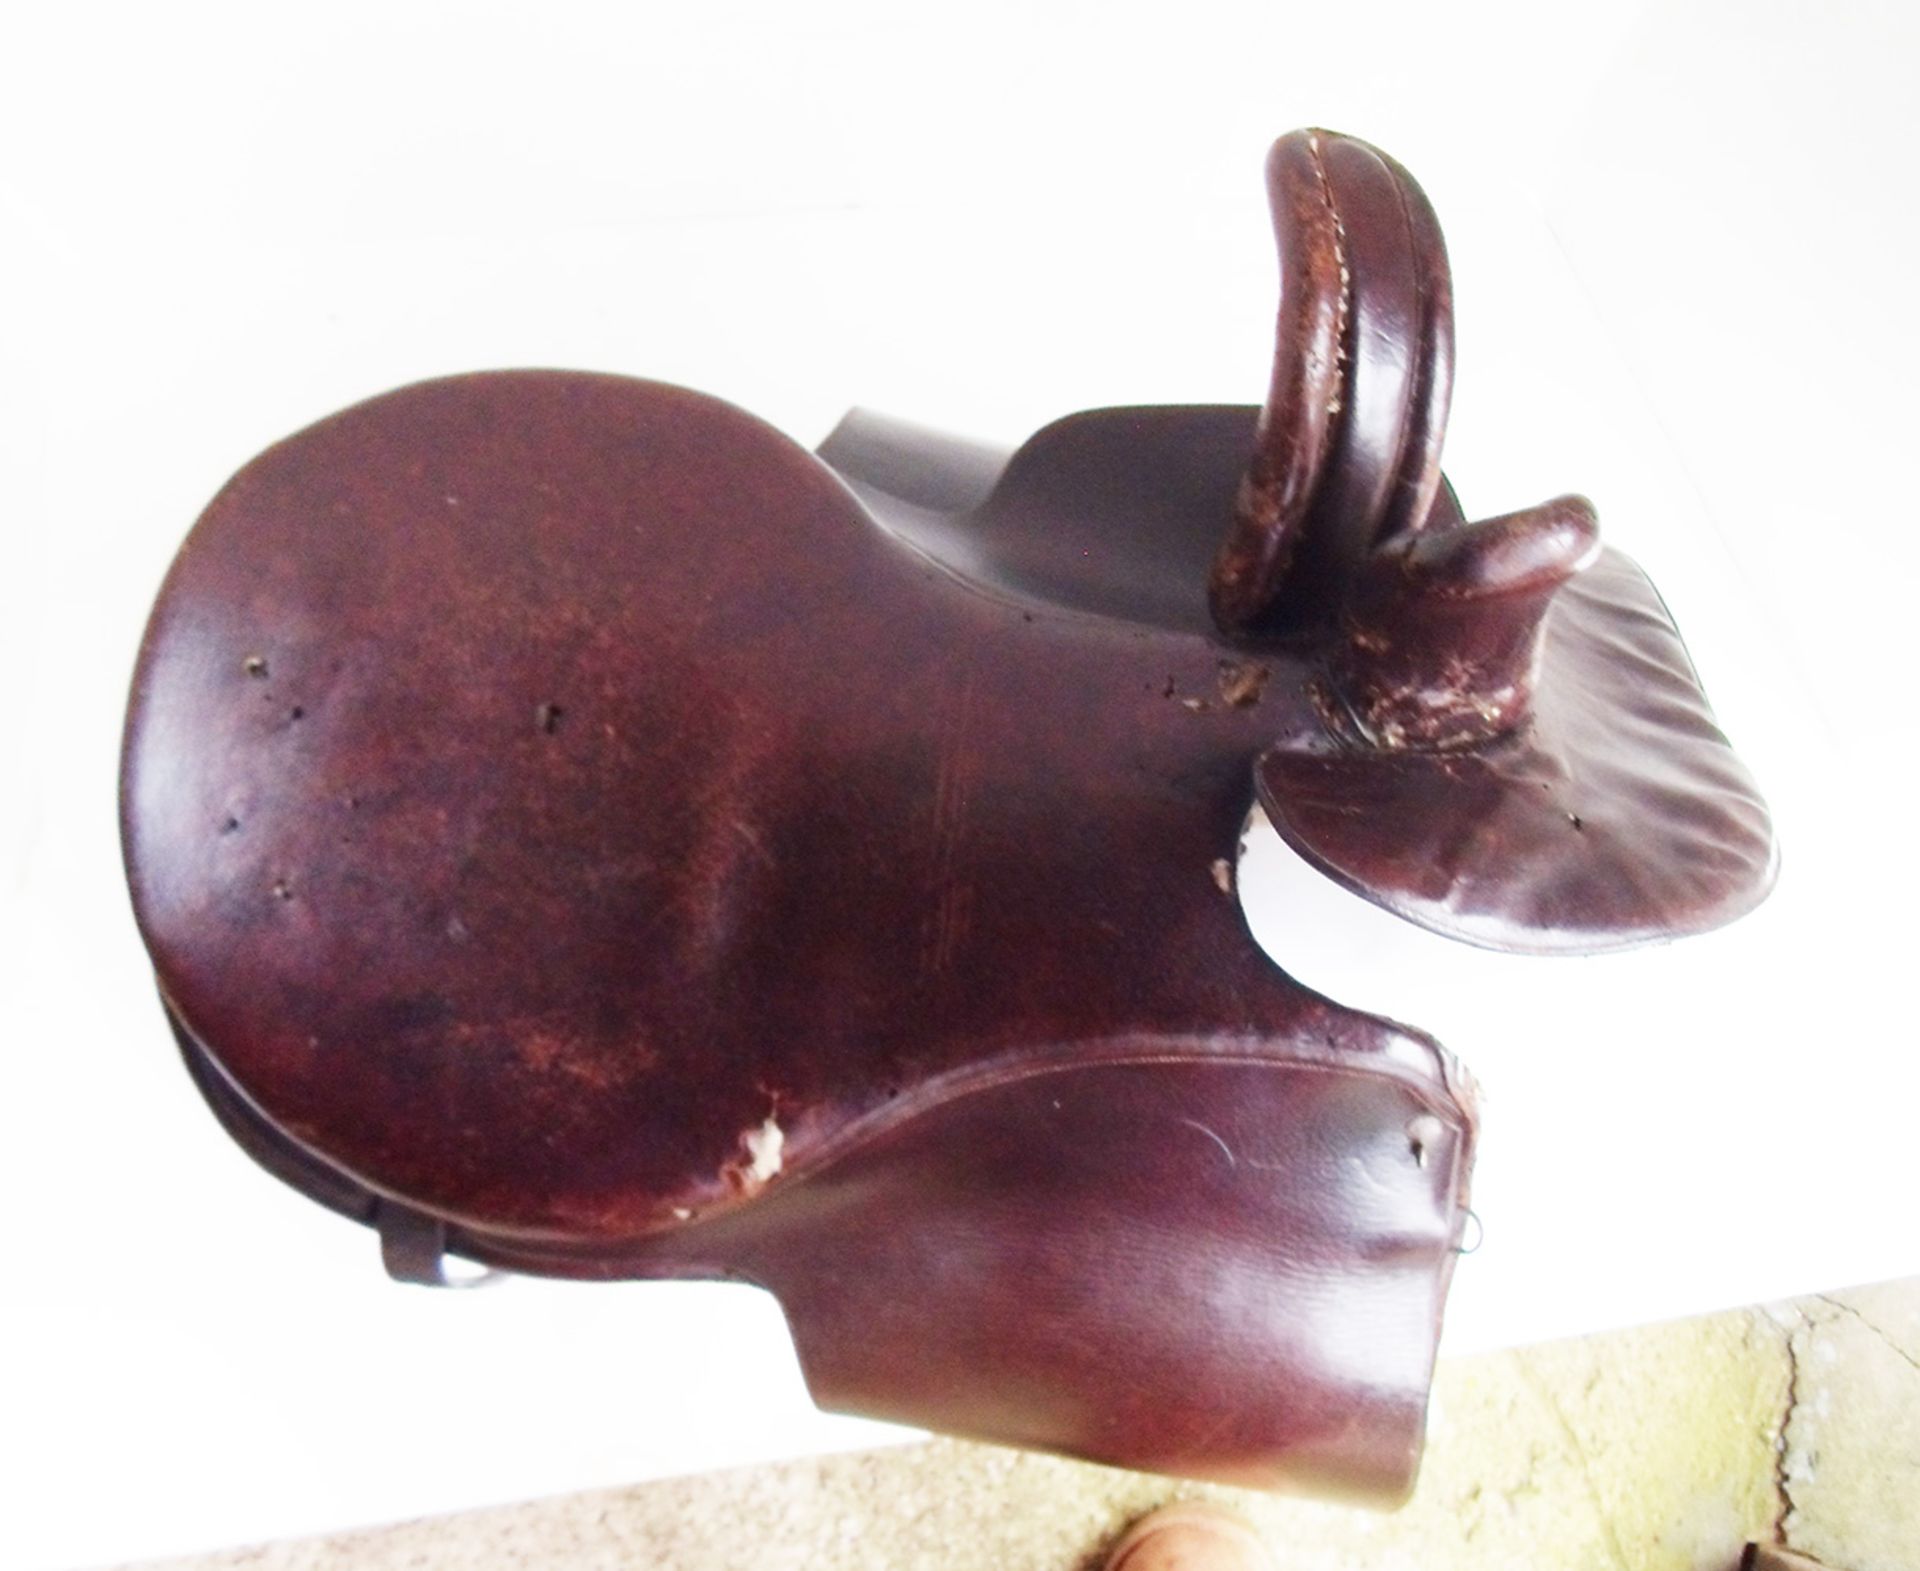 Brown leather traditional side saddle - Image 3 of 3